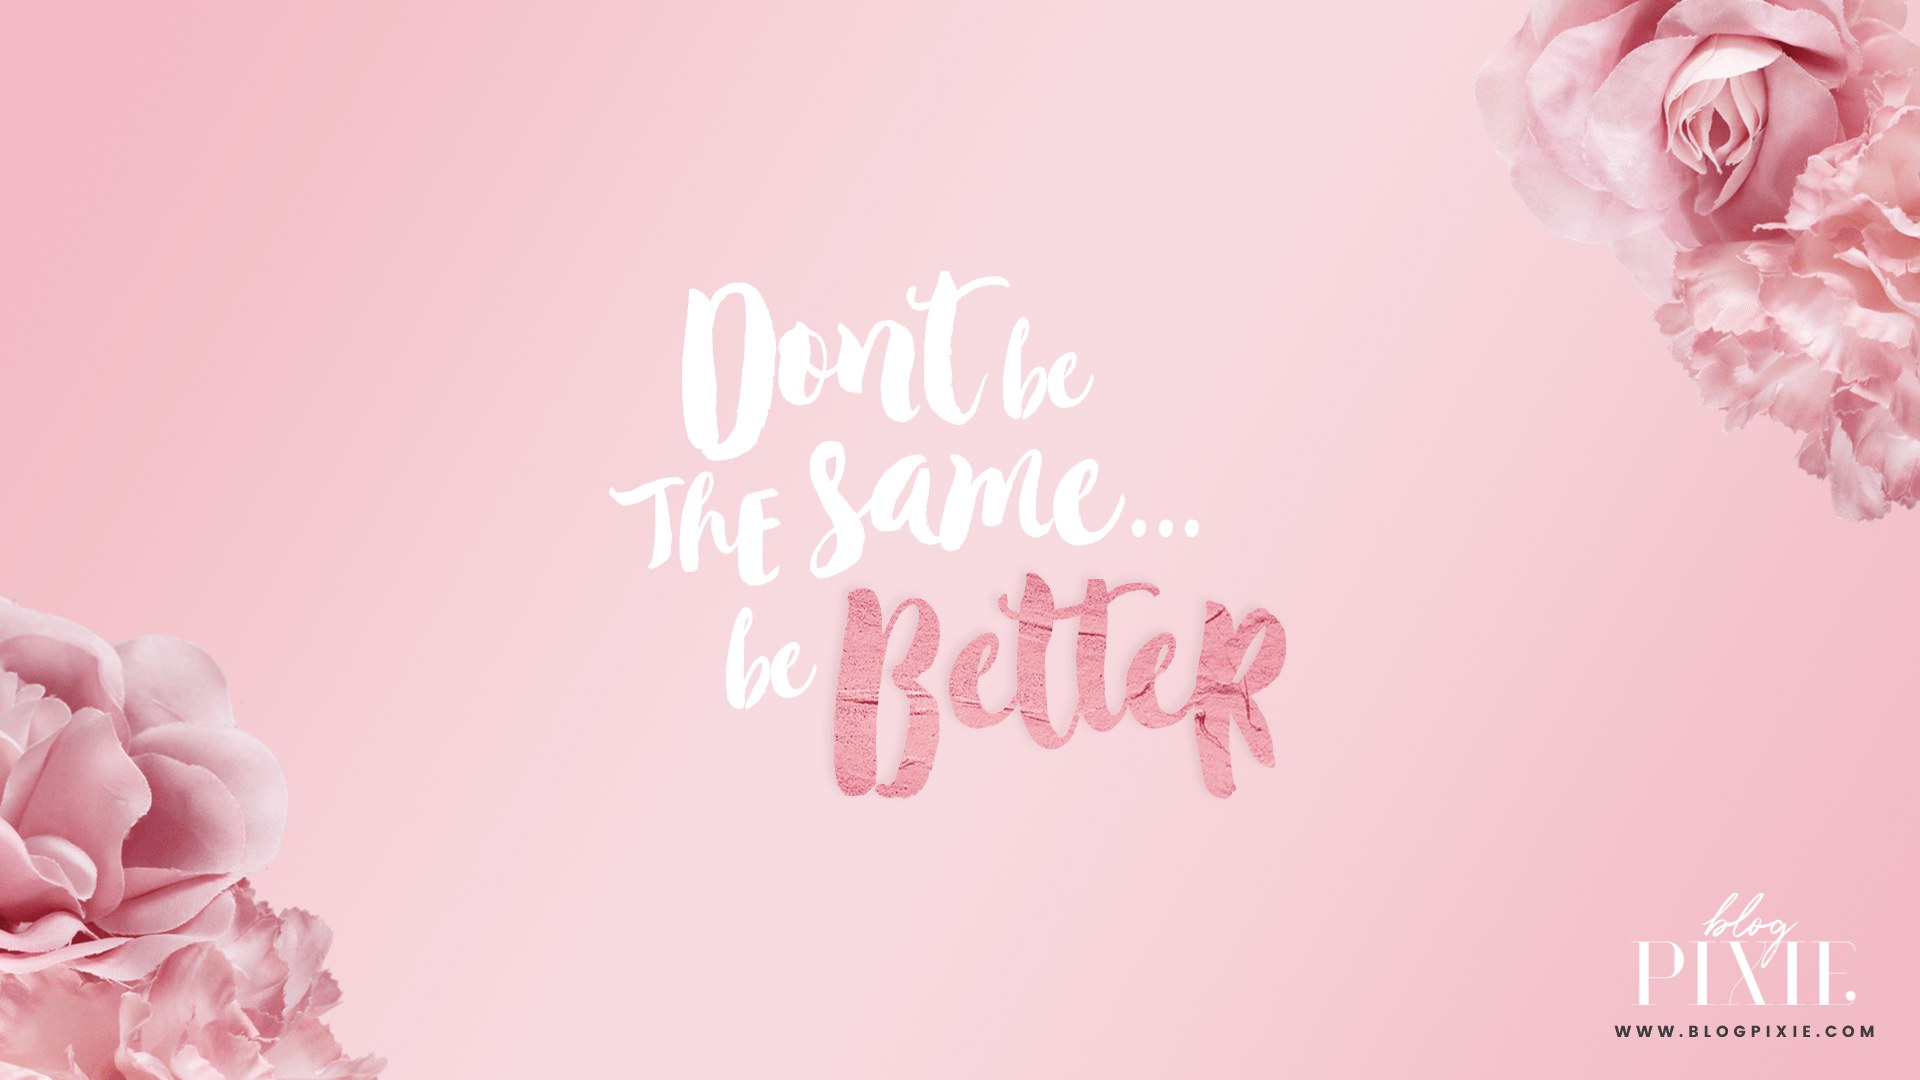 Don't be the same... be better wallpaper, rose gold